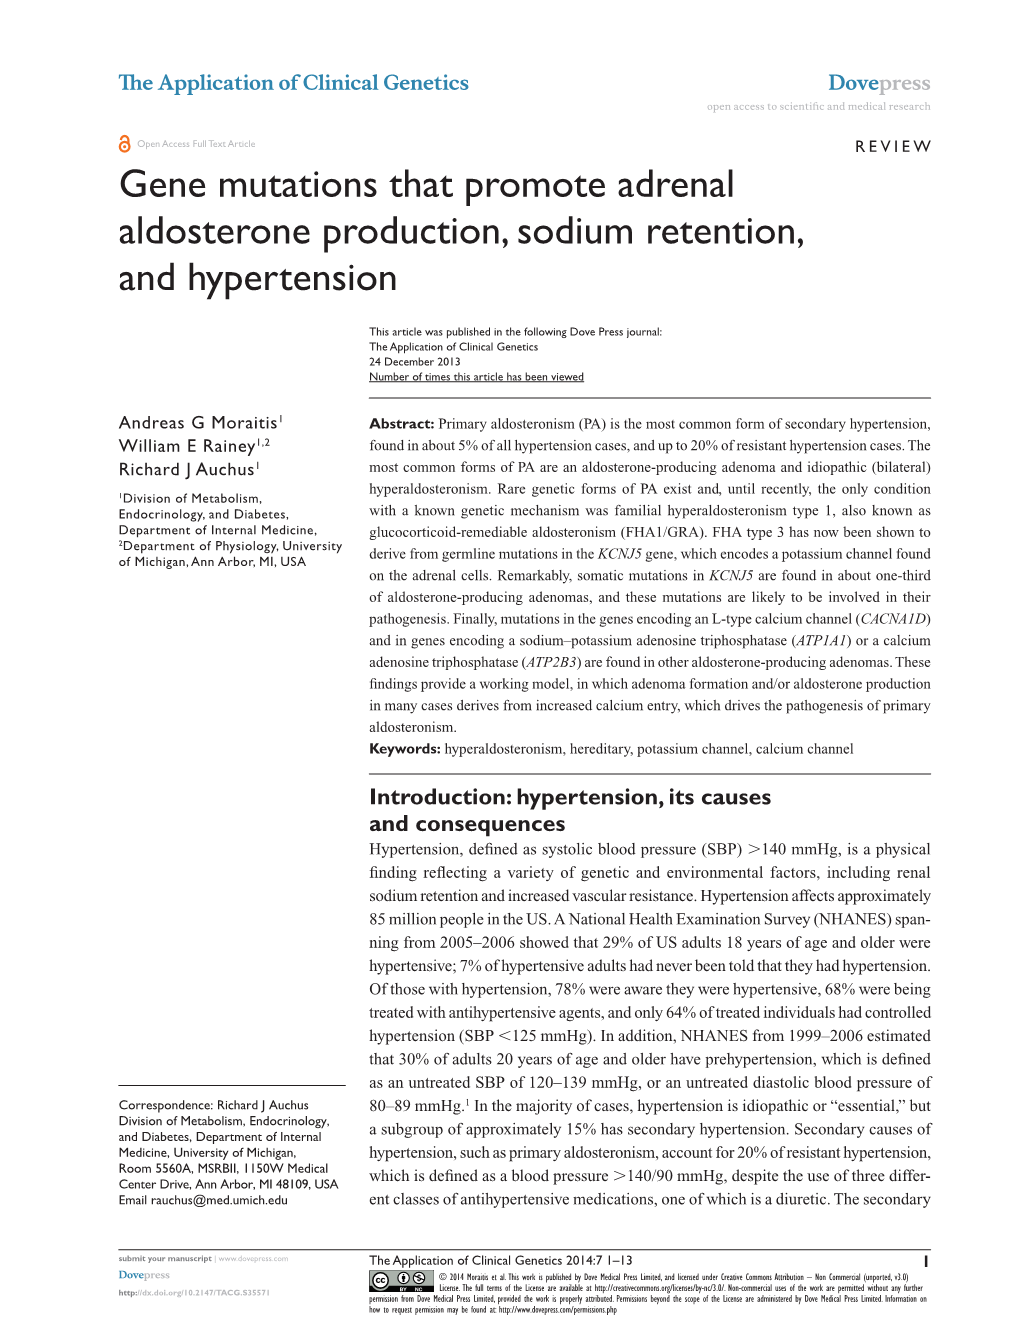 Gene Mutations That Promote Adrenal Aldosterone Production, Sodium Retention, and Hypertension